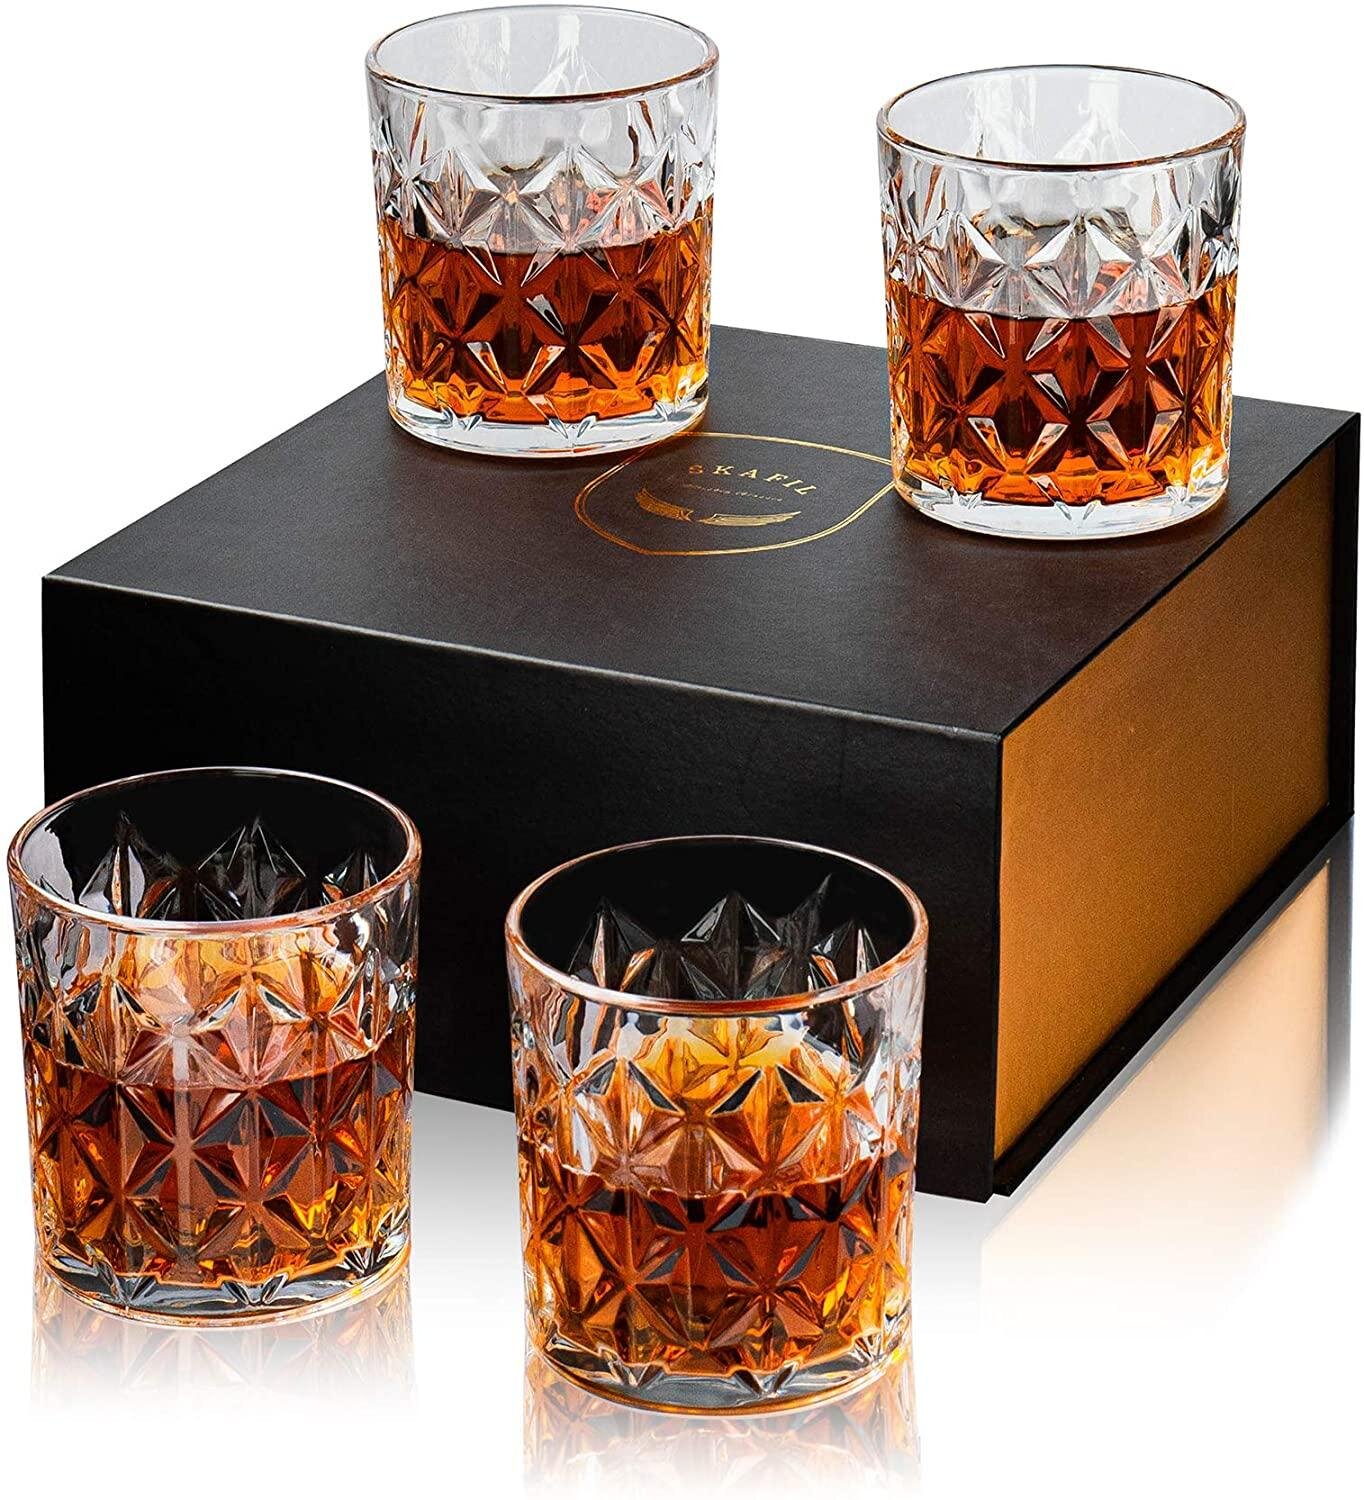 Whiskey Glasses Glass Crystal Old Fashioned Scotch Bourbon Whisky Drinking Gift